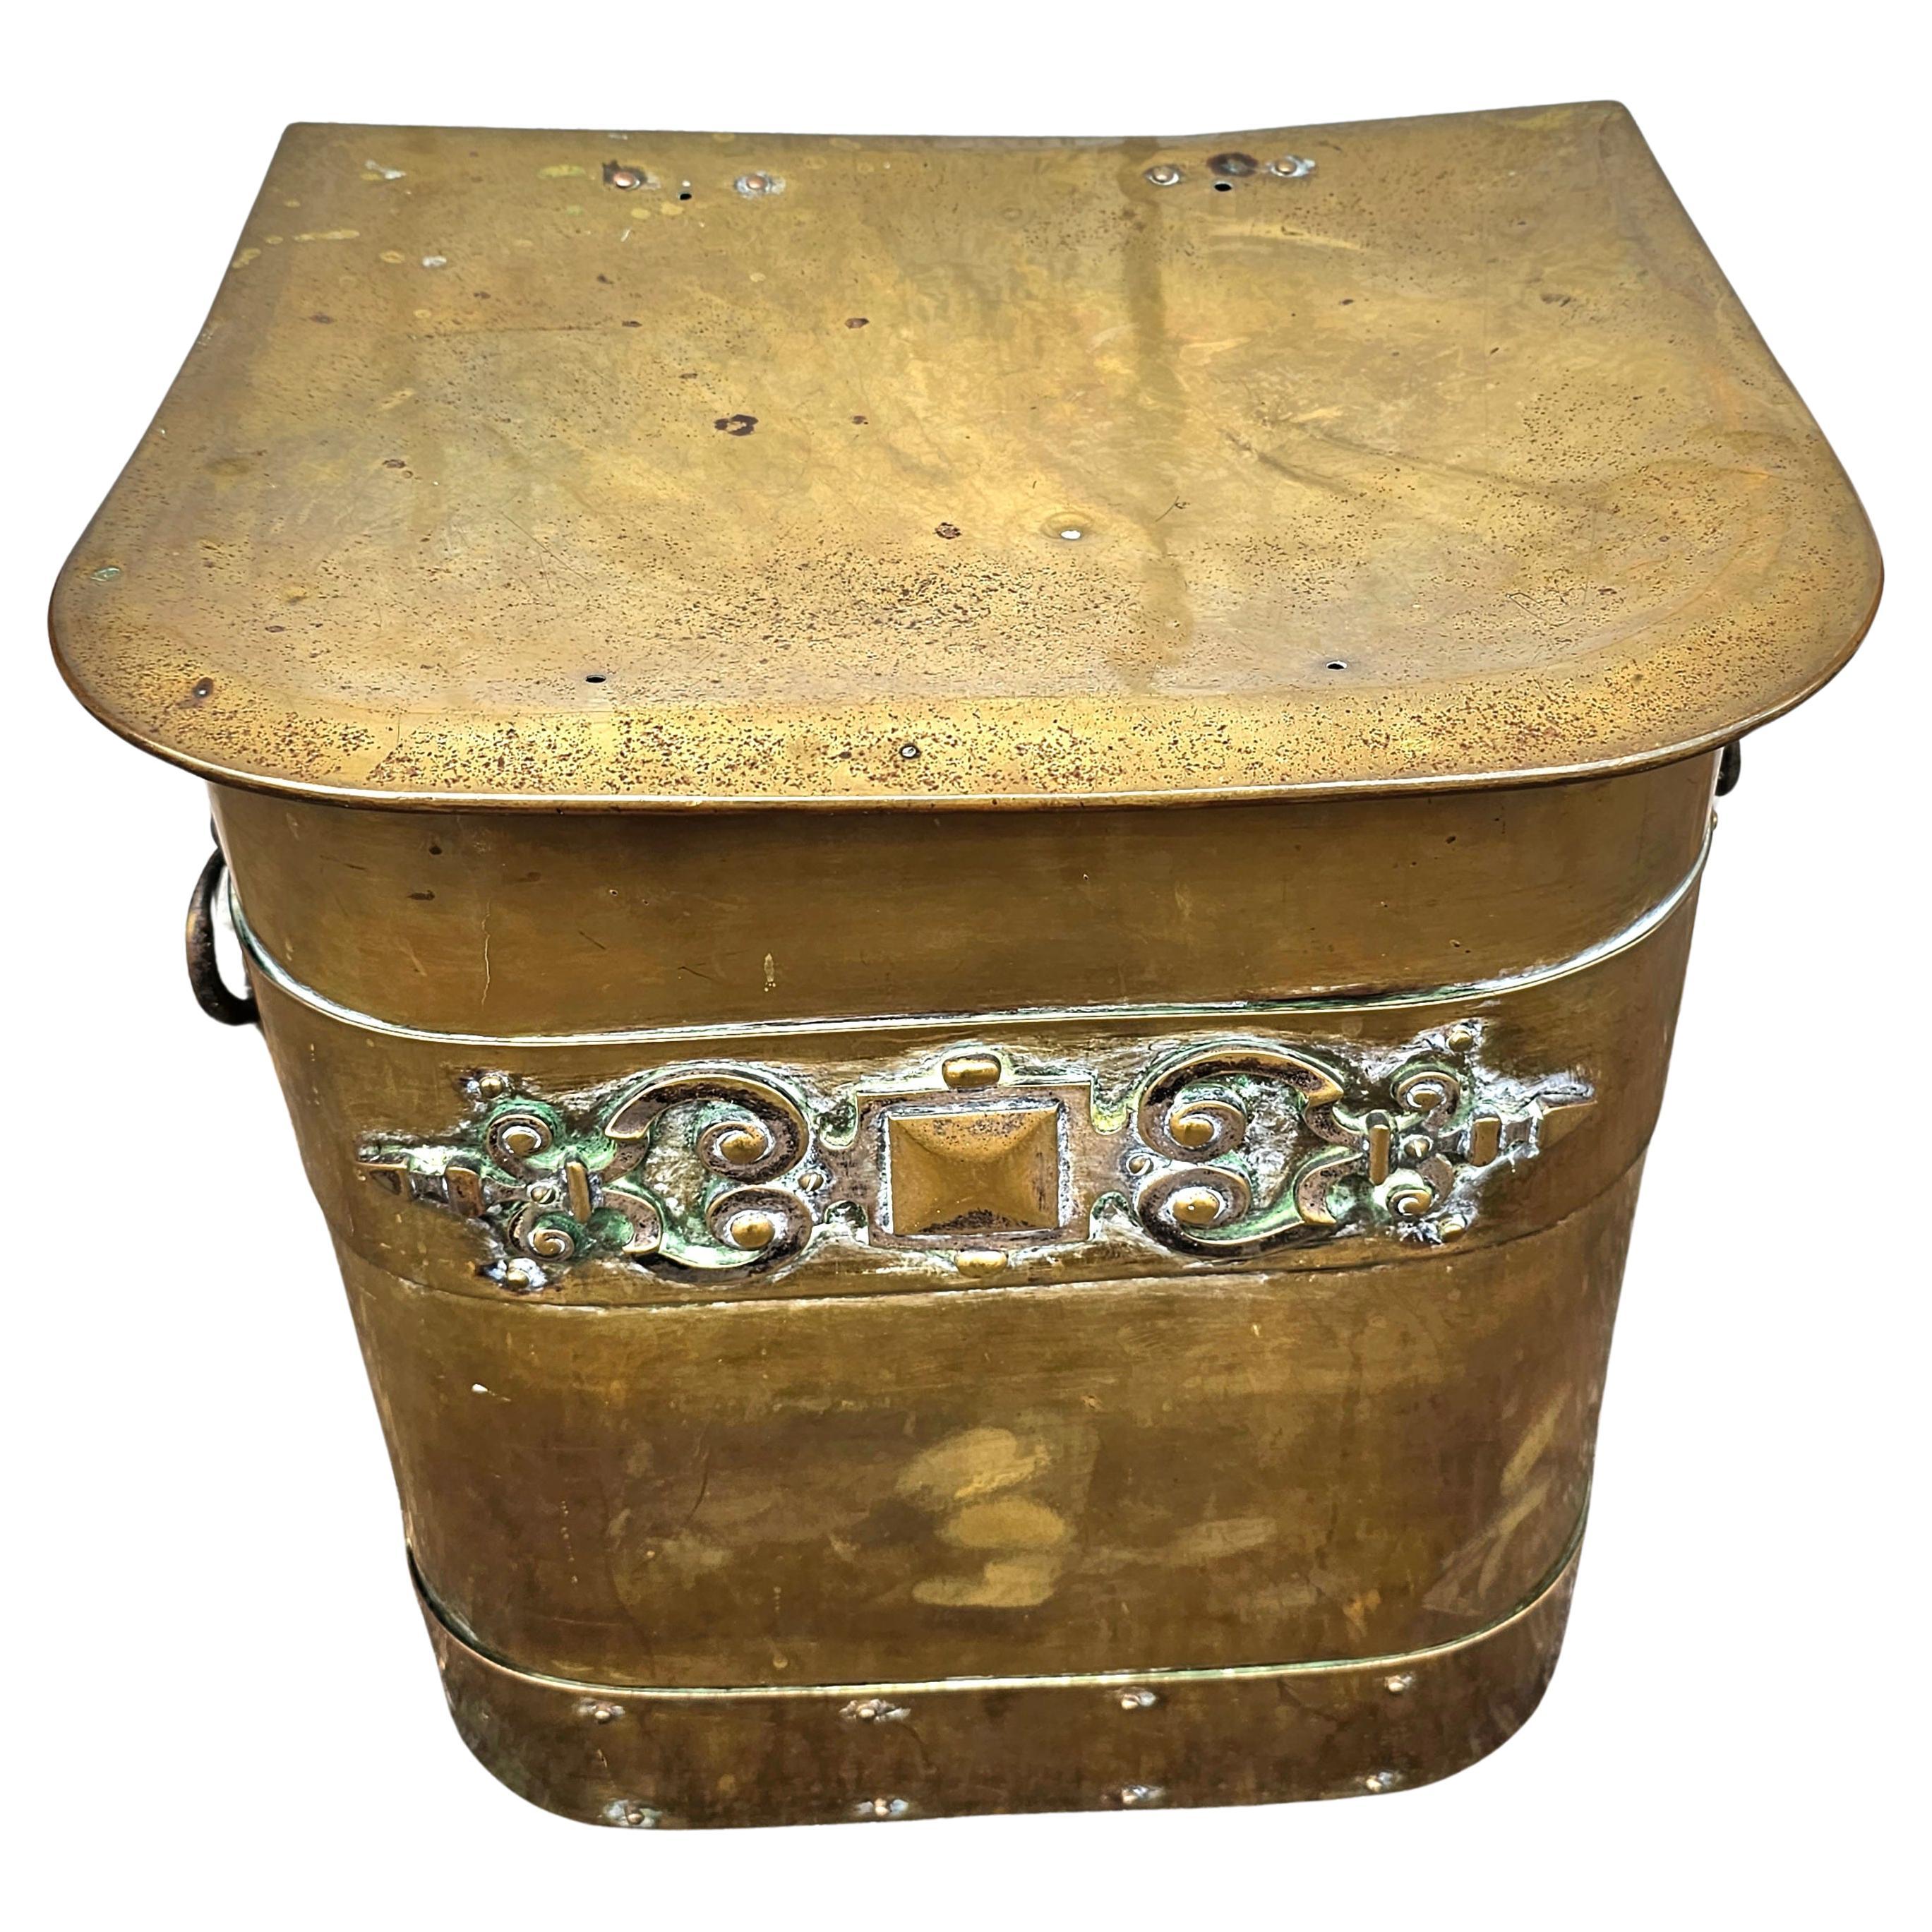 An Early 20th Century Art Deco Brass Fireplace hinged covered top Fuel Bucket with iron double lined. Measures 15